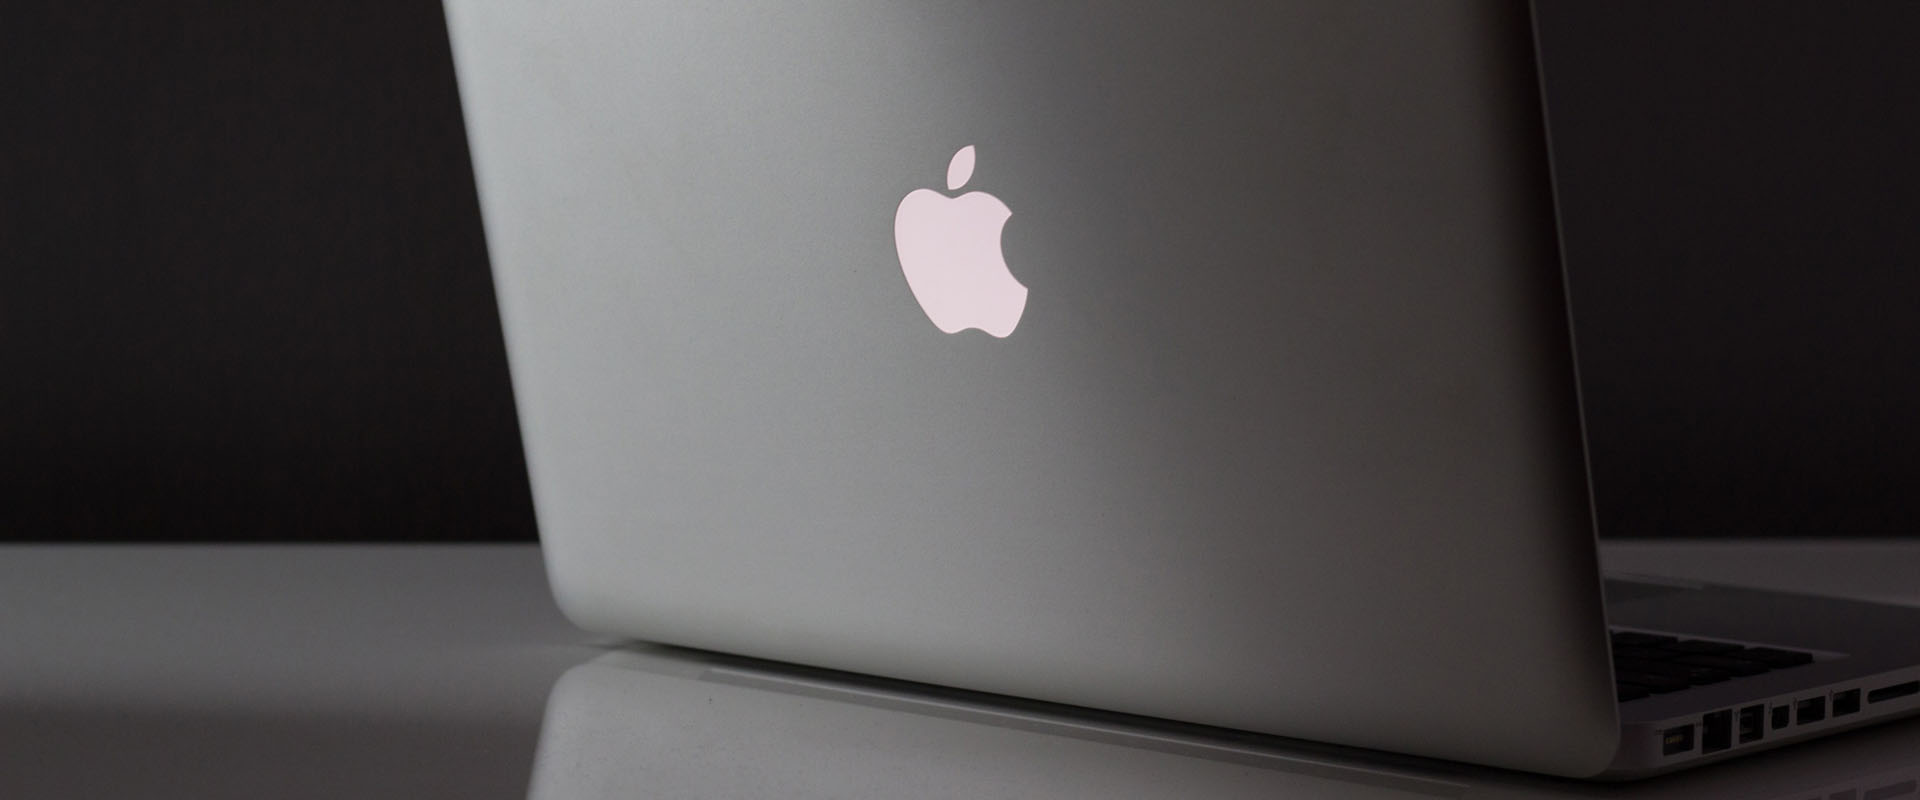 Apple MacBook representing the Secrets of the biggest selling launch ever